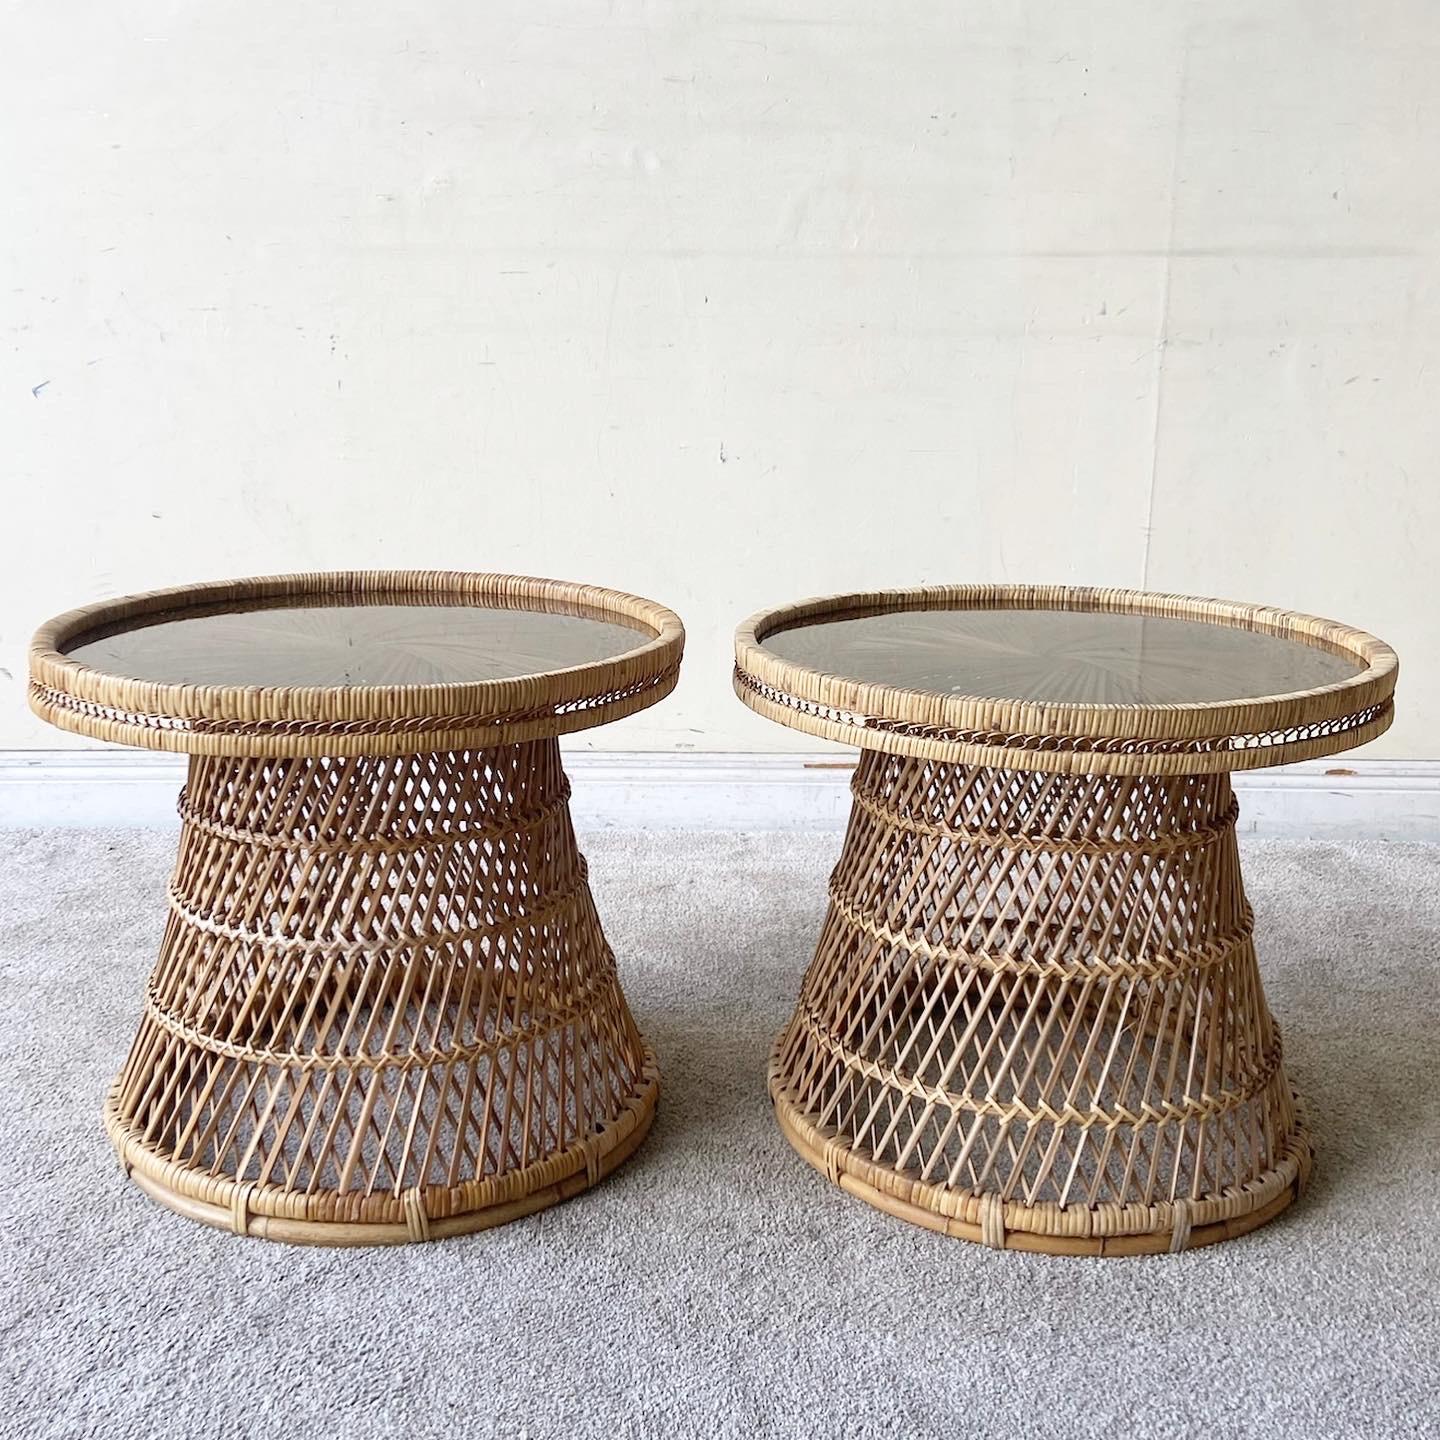 Incredible pair of vintage bohemian hour glass buri rattan side tables. Each circular table features an inlaid smoked glass top.
  